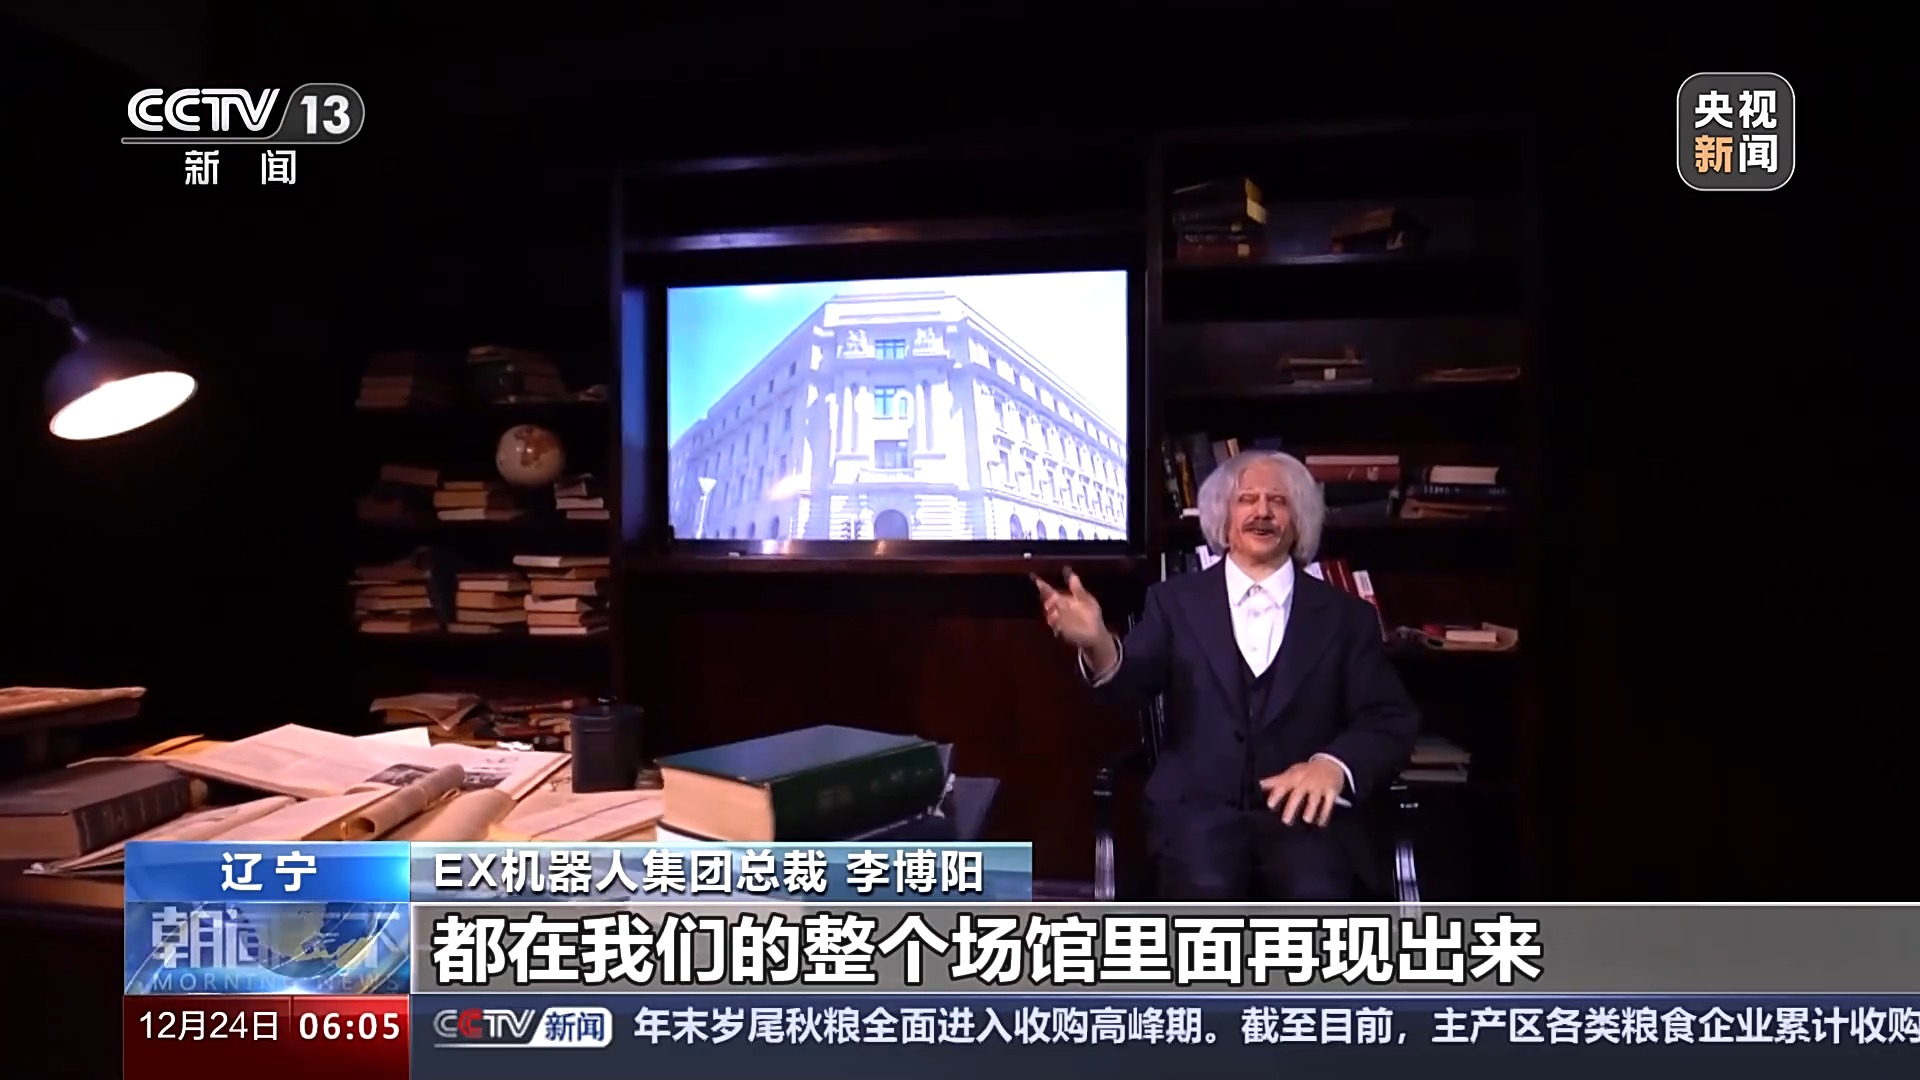 The one-to-one ratio bionic robot of the German scientist Albert Einstein is on display in the EX Future Science and Technology Museum in northeast China's port city of Dalian. /CMG